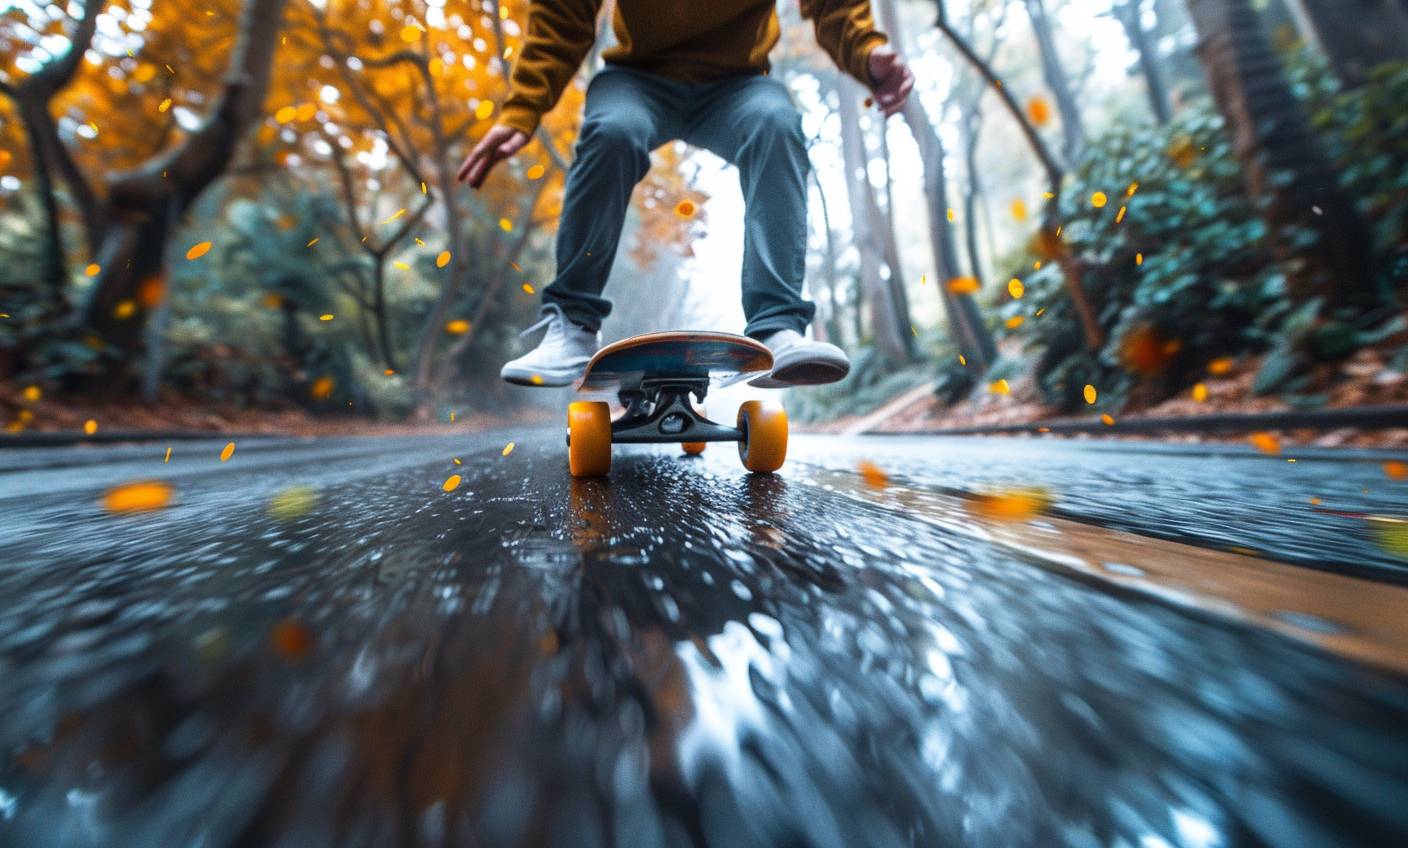 Action photo of downhill skateboarding, worms eye view